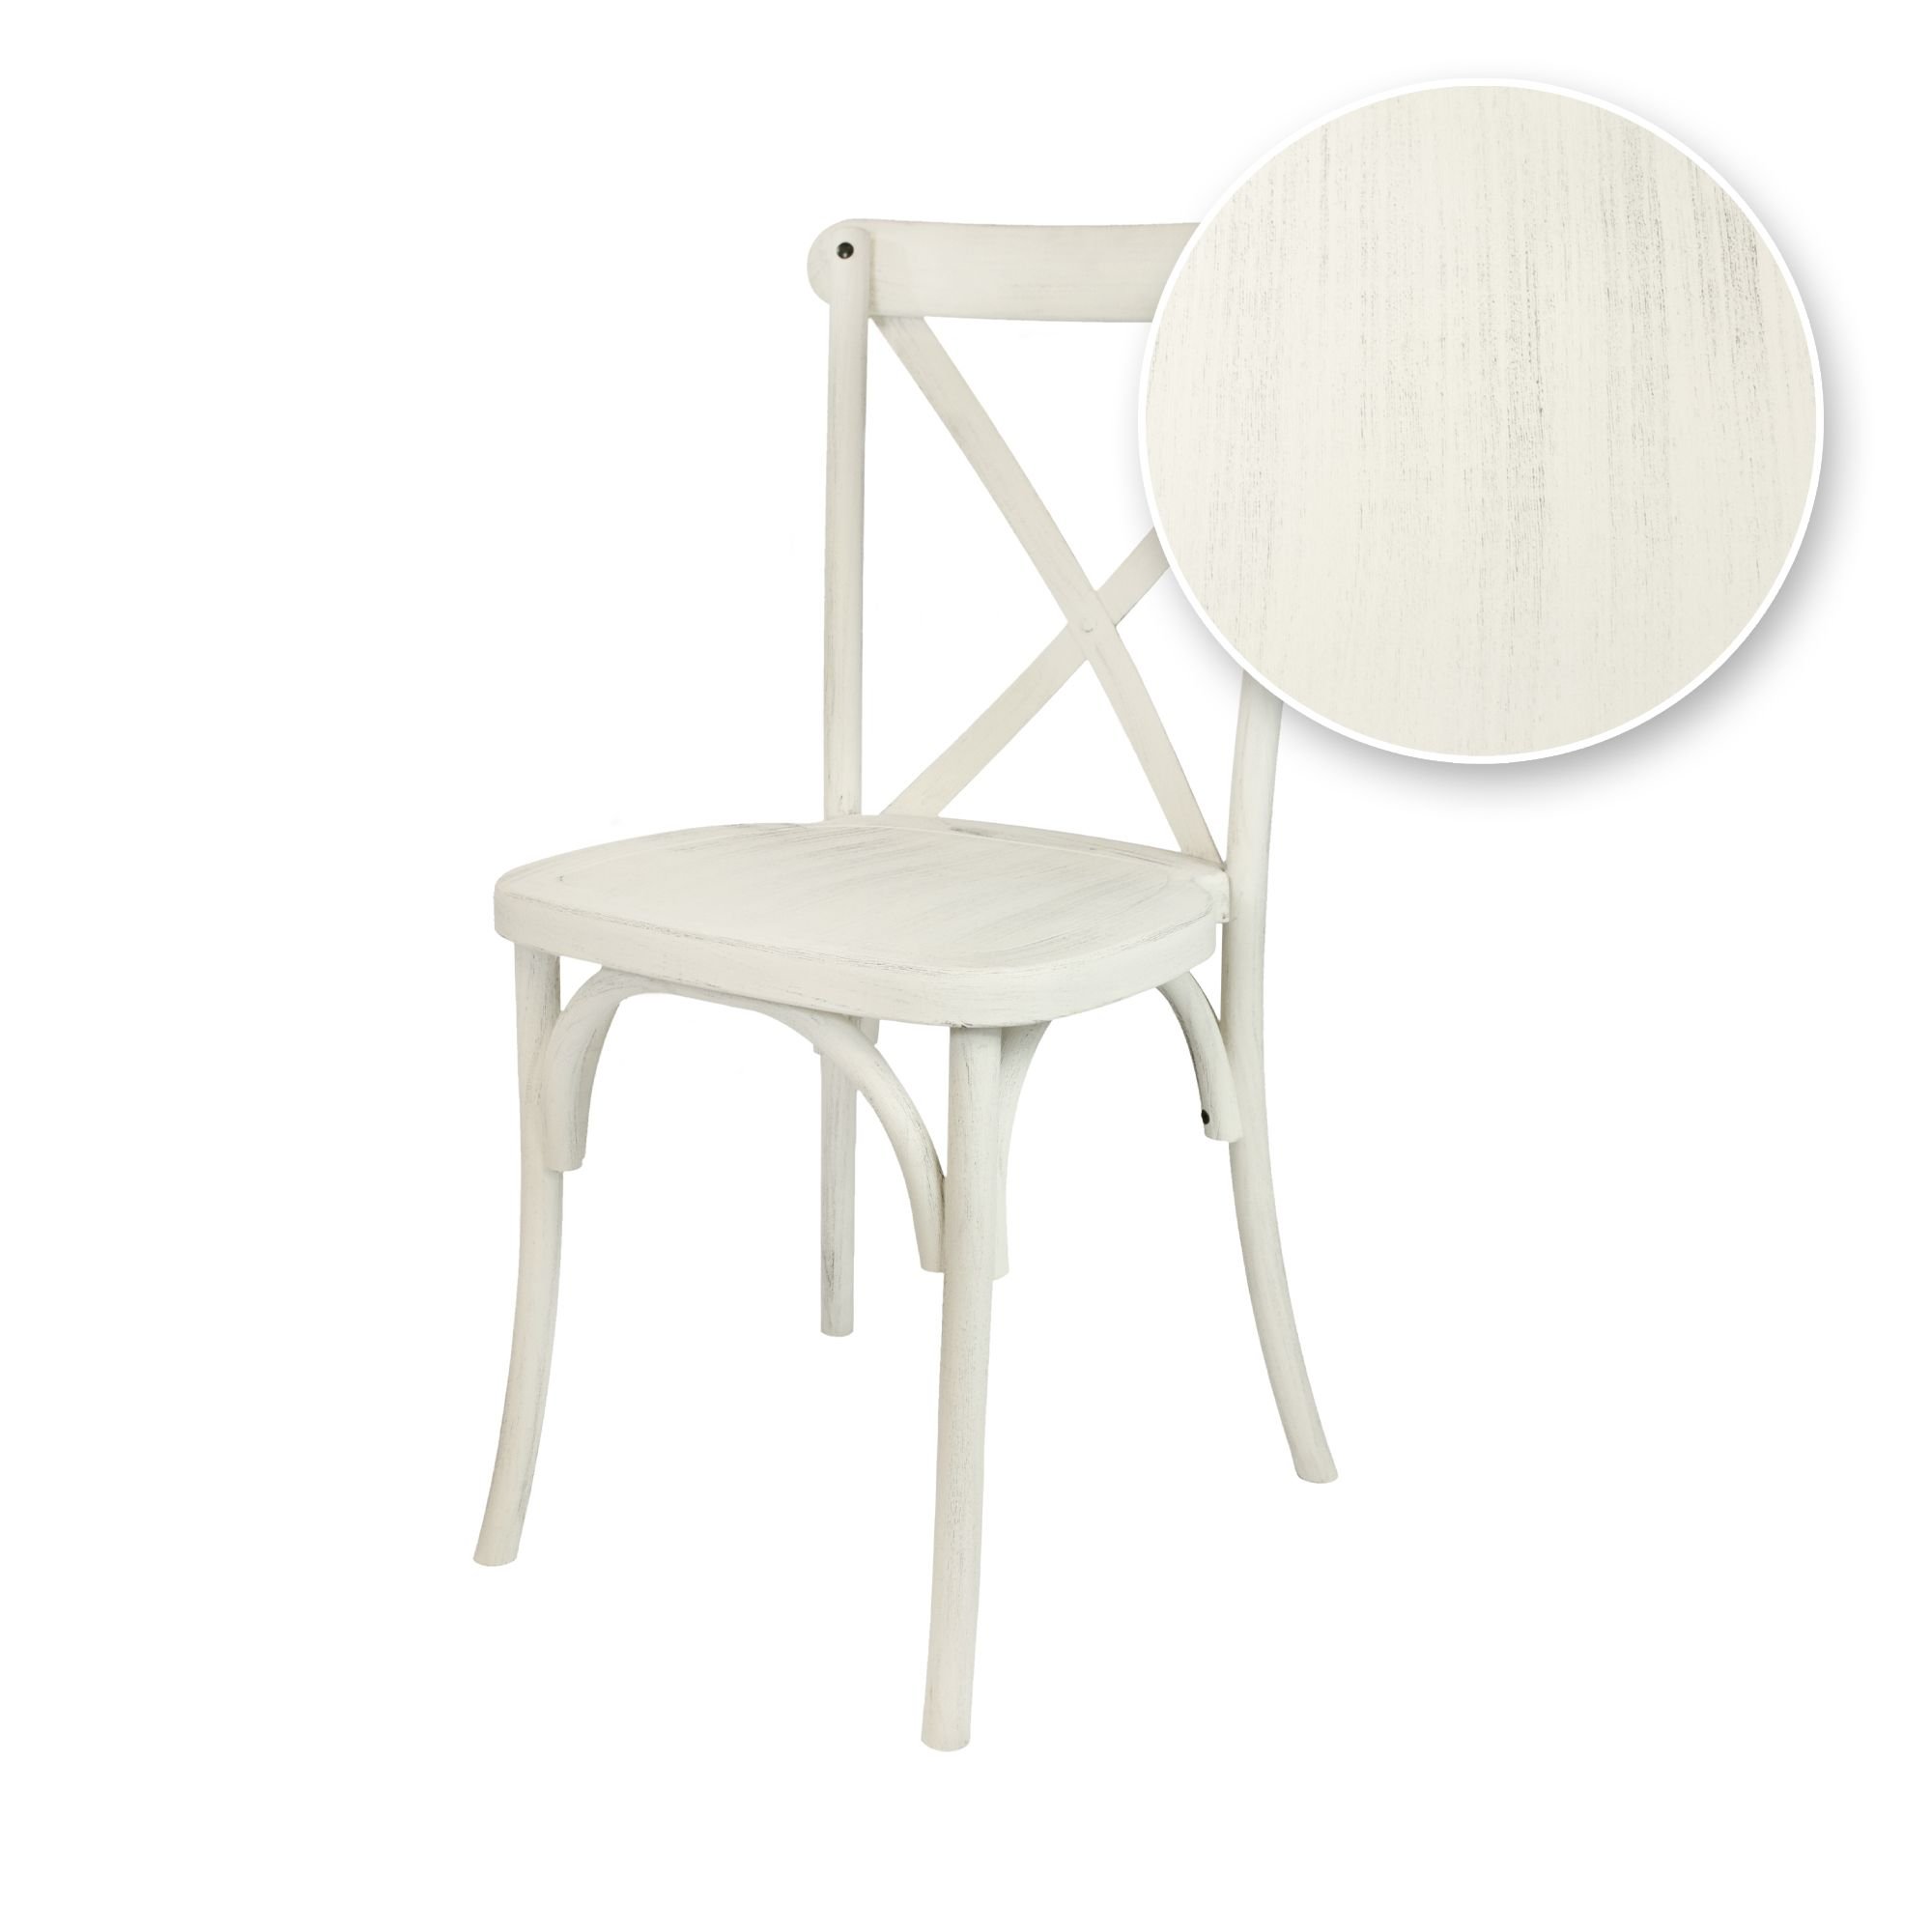 Chair Crossback Resin White Distressed Steel Core C Series CXRWD STEEL CX T Chair Swatch